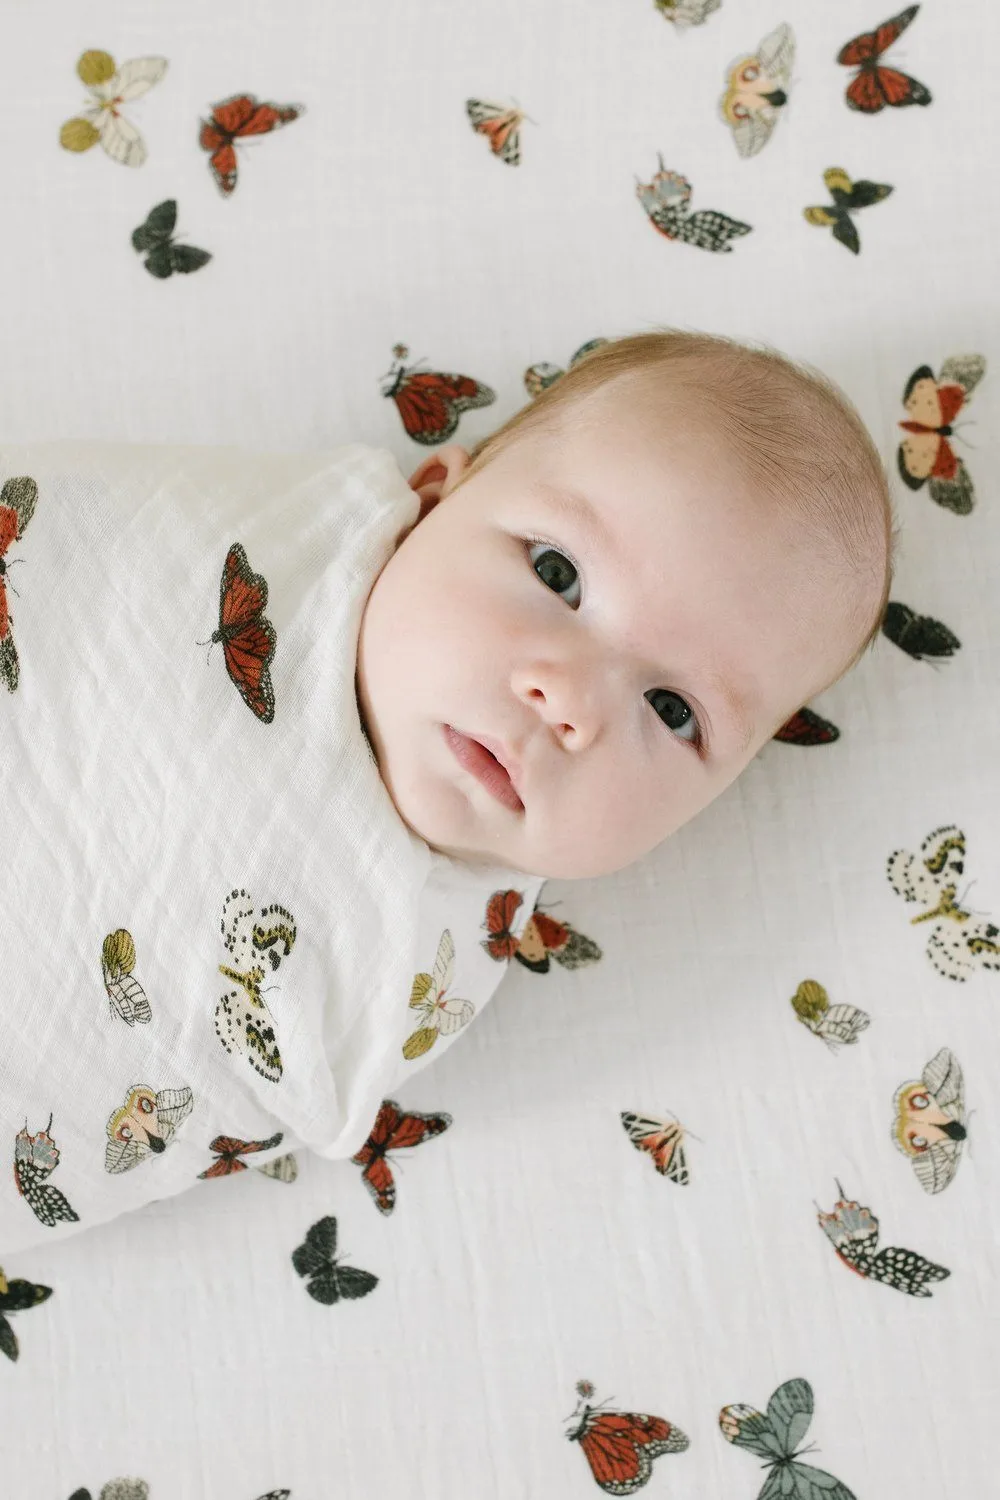 Butterfly Migration Crib Sheet and Swaddle Blanket